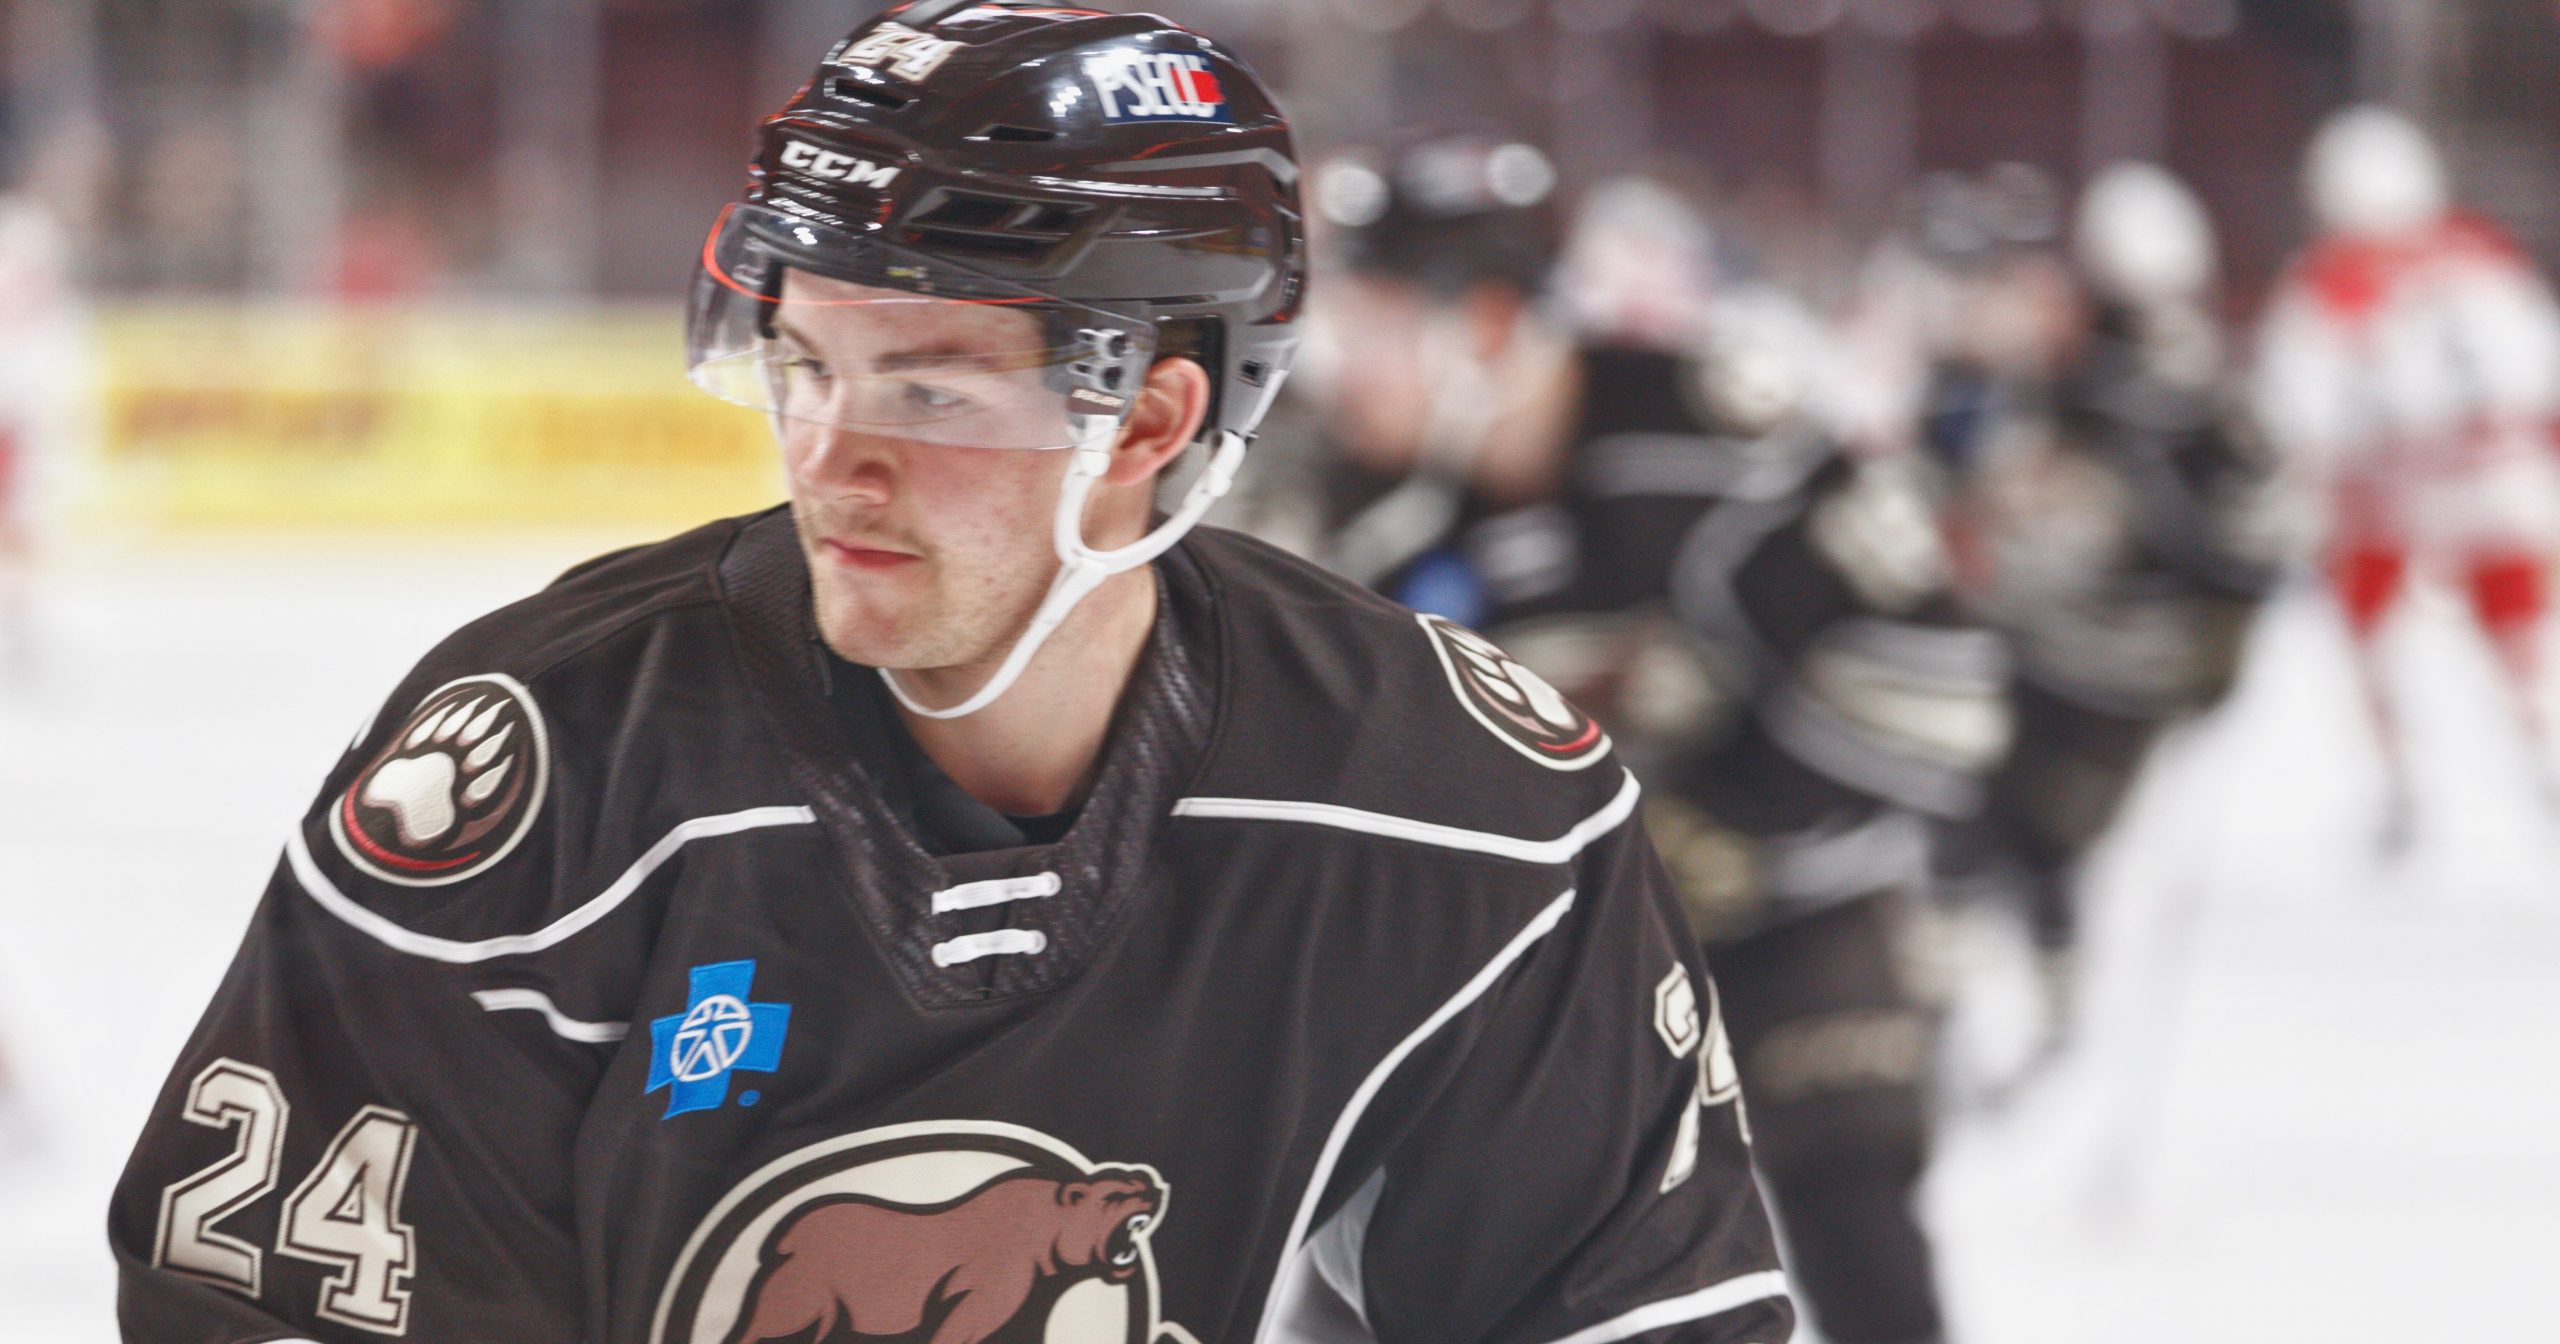 Going Deep: Hershey Bears are celebrating their 10th season at Giant Center  